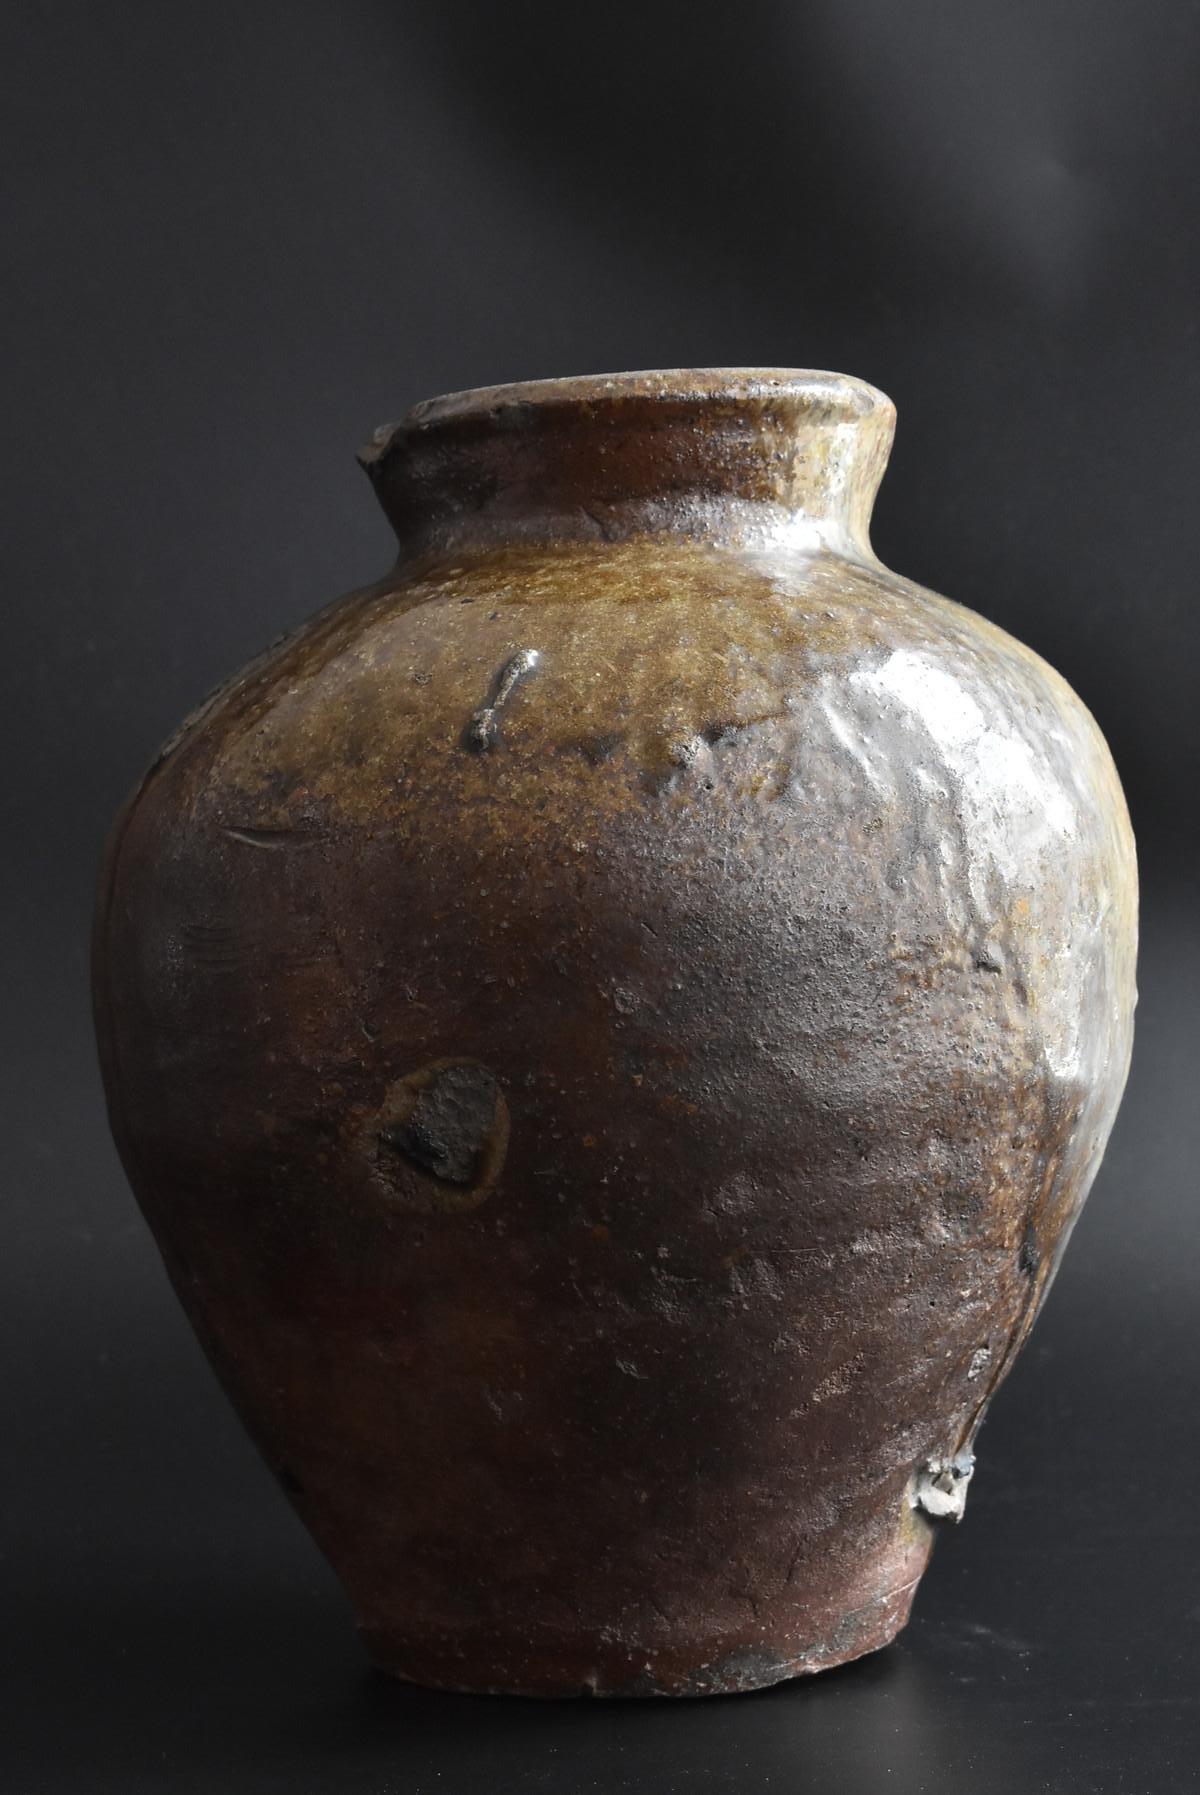 18th Century and Earlier Japanese Tokoname Pot 14th-16th Century Muromachi Period / Tsubo / Old Pottery